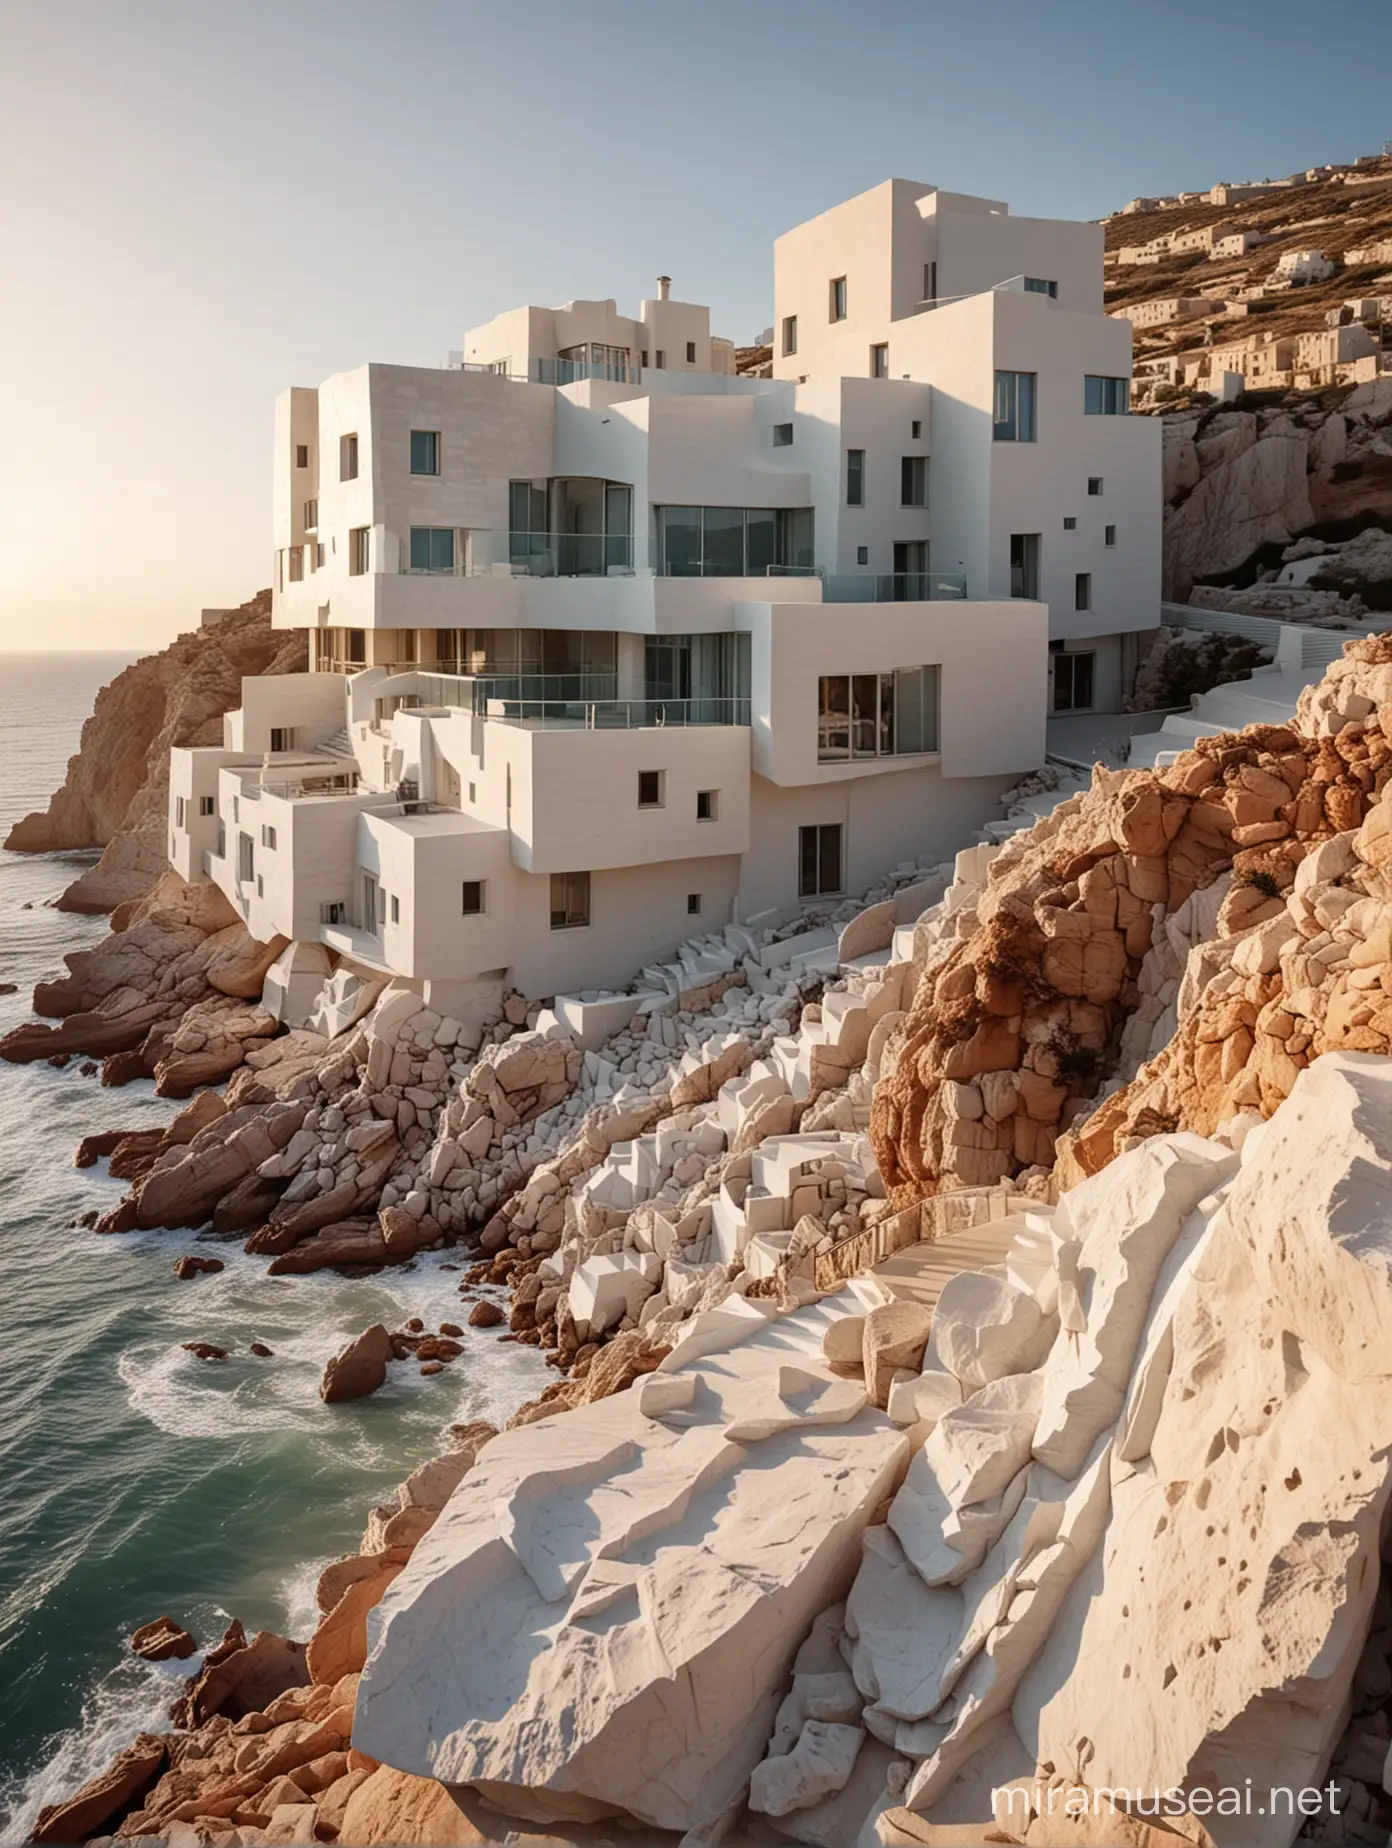 Carved architectures STYLE frank gehry modern many cubic architecture with glass and white stone, at the stone ,drone view, modern architectures  and the white plaster,  at the cost of malta near the sea with rock, sunset, 32k cinematic light hyper-reliastic photo light inside the architecture32k